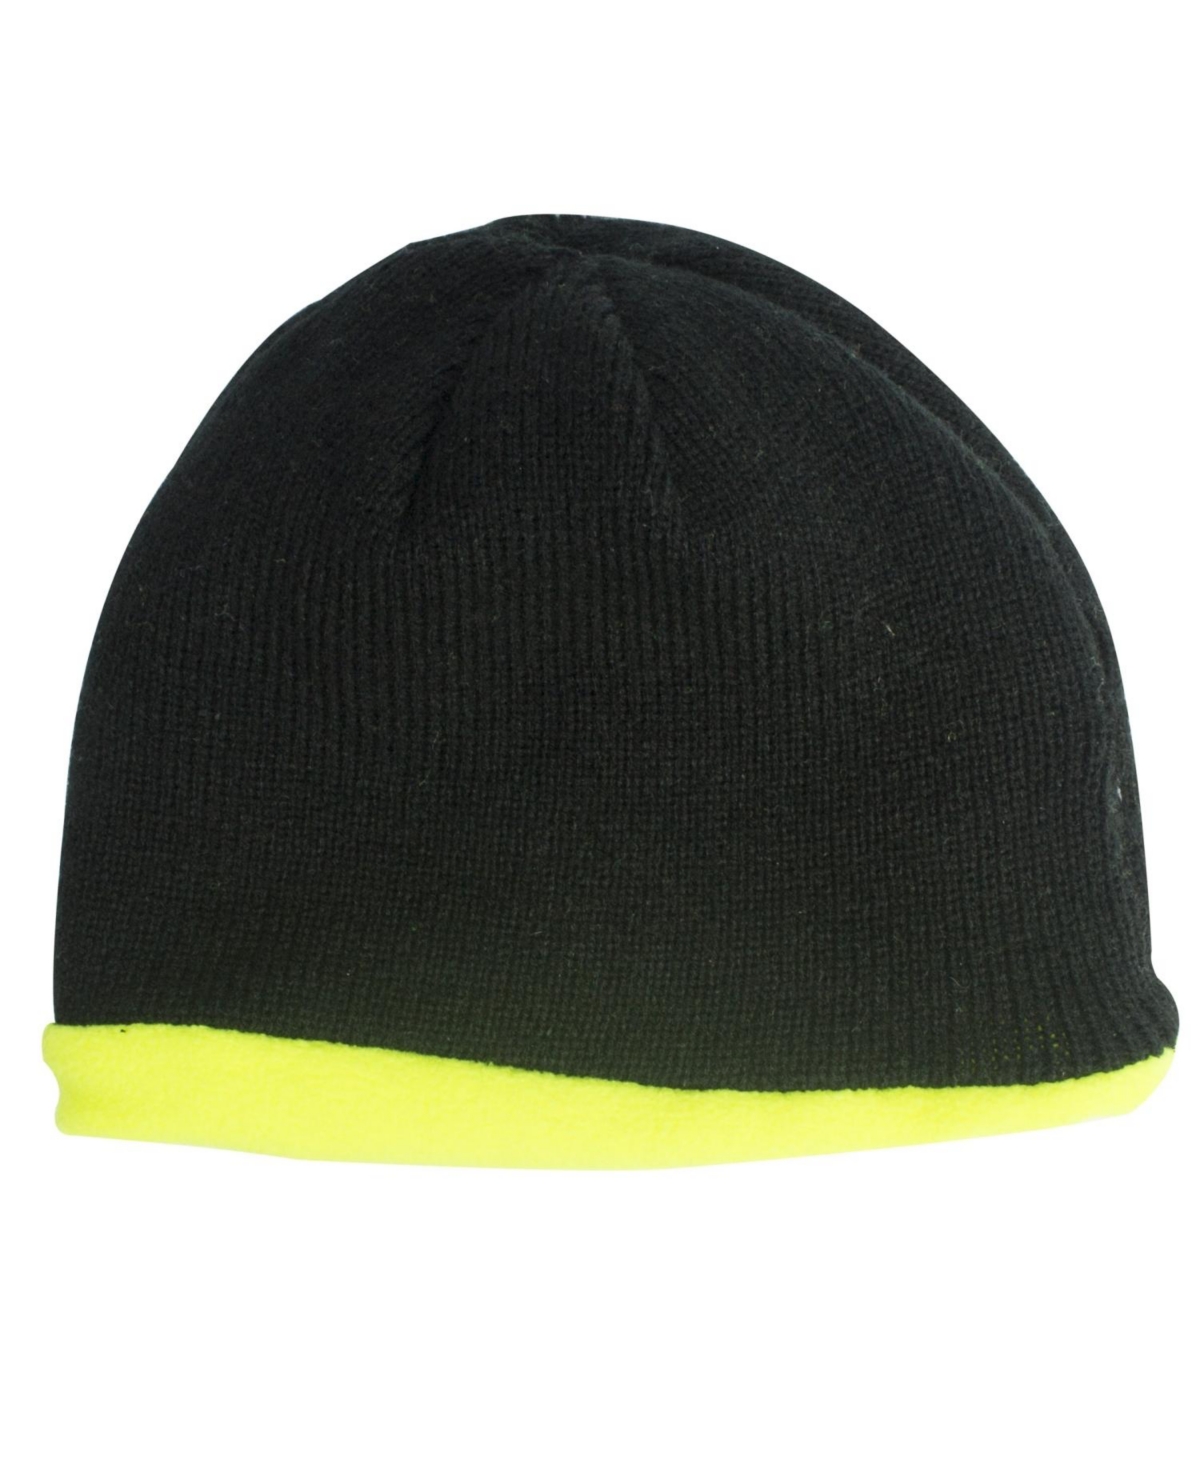 Unisex Reversible Fleece Beanie, High Vis Green and Black, One Size - Bright Green